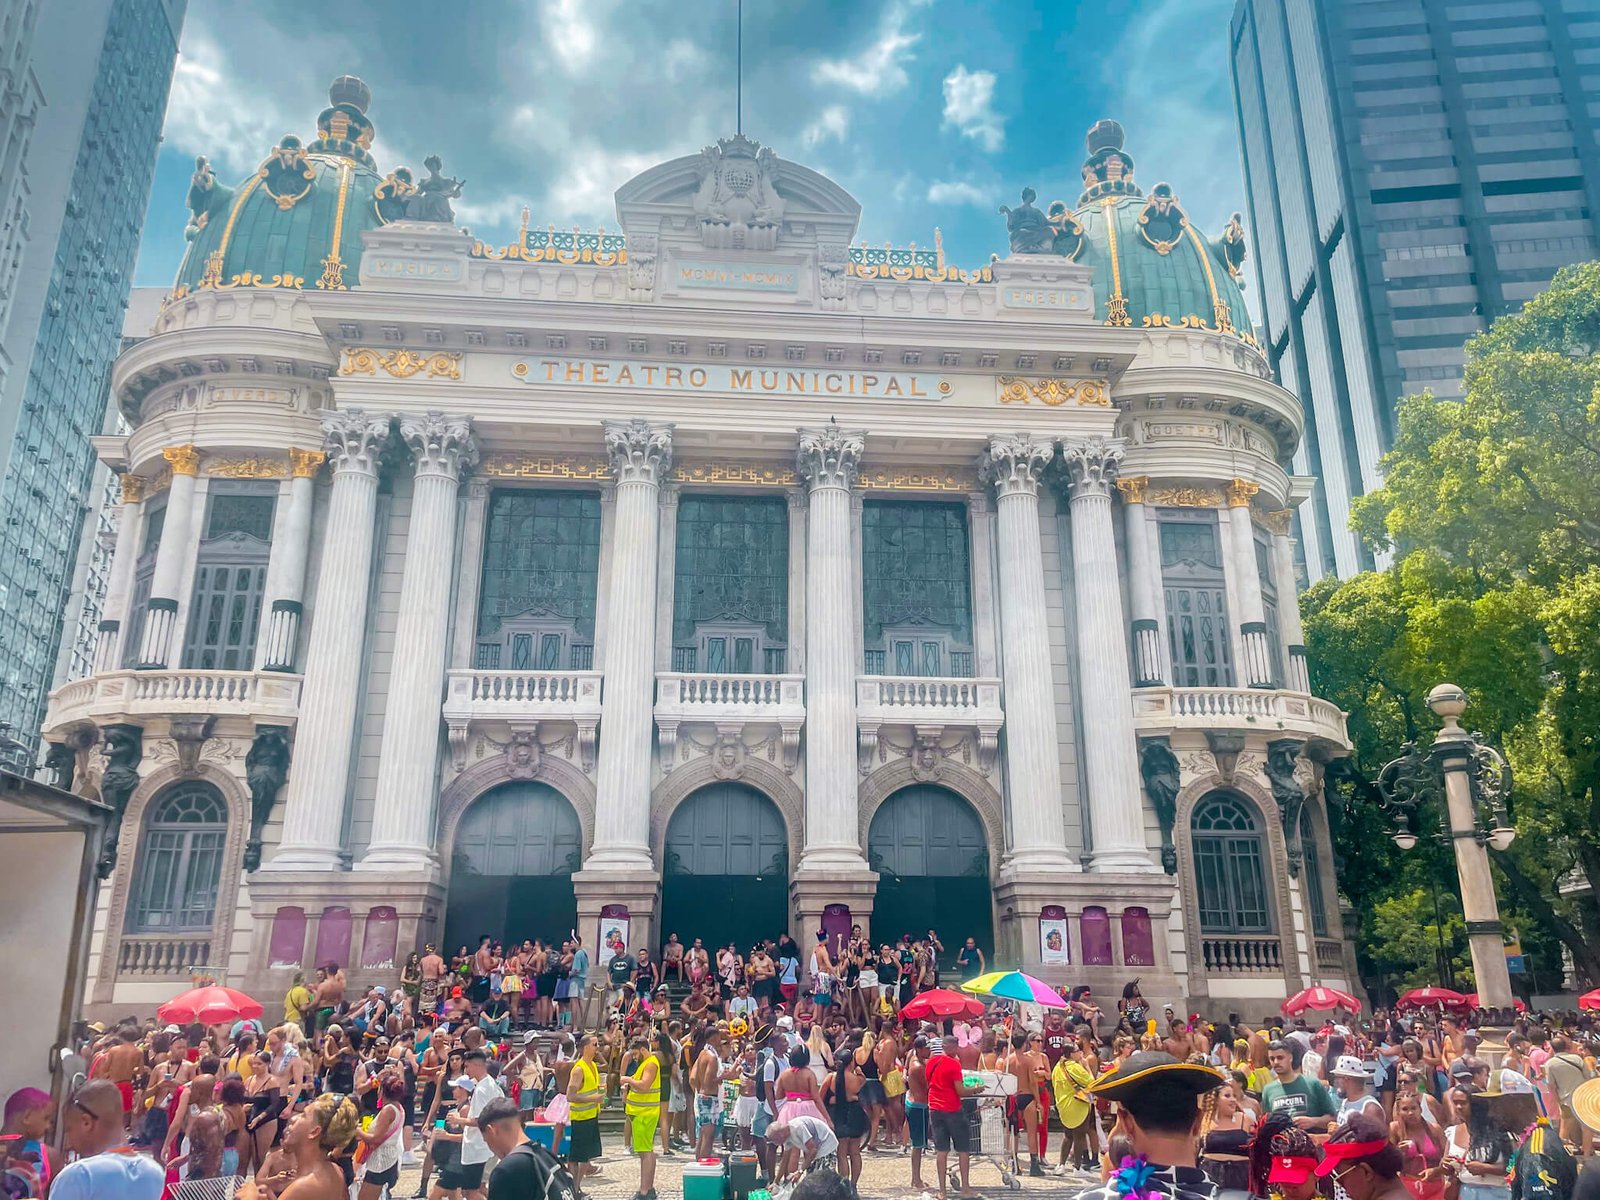 theater municipal, Instagrammable places in Rio de Janeiro